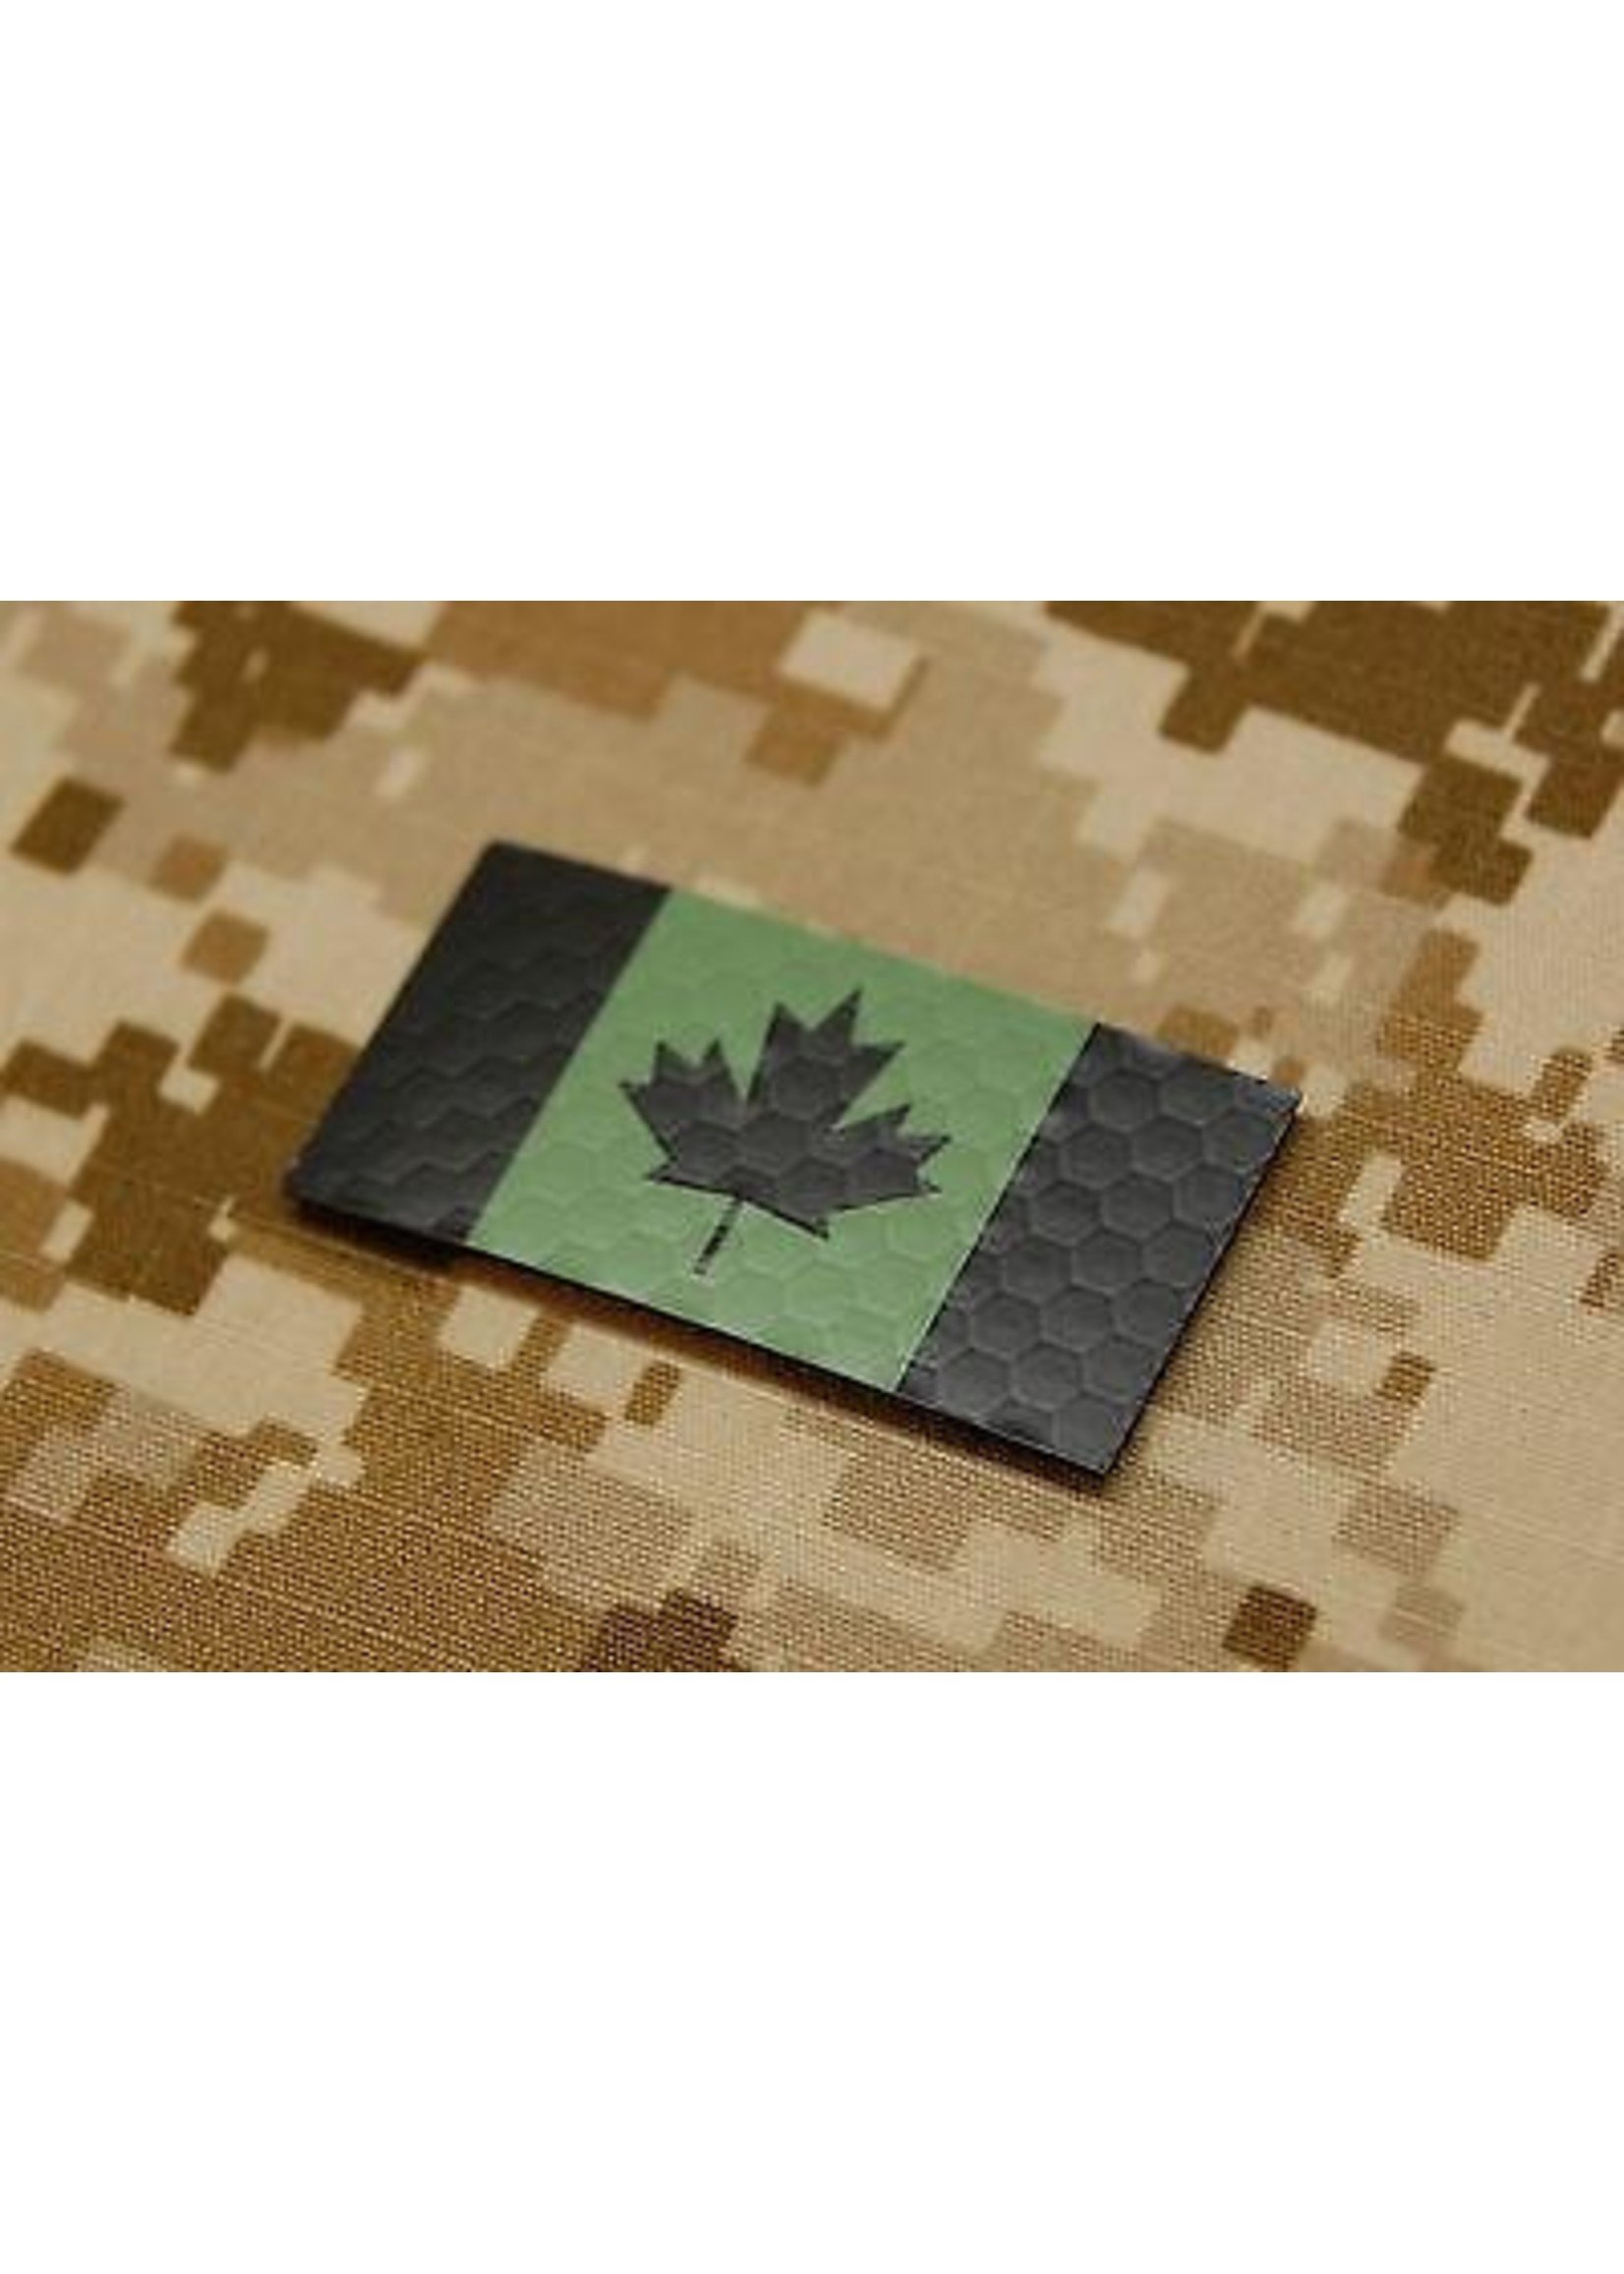 SDTAC INFRARED MINI CANADIAN FLAG PATCH - GREEN & BLACK